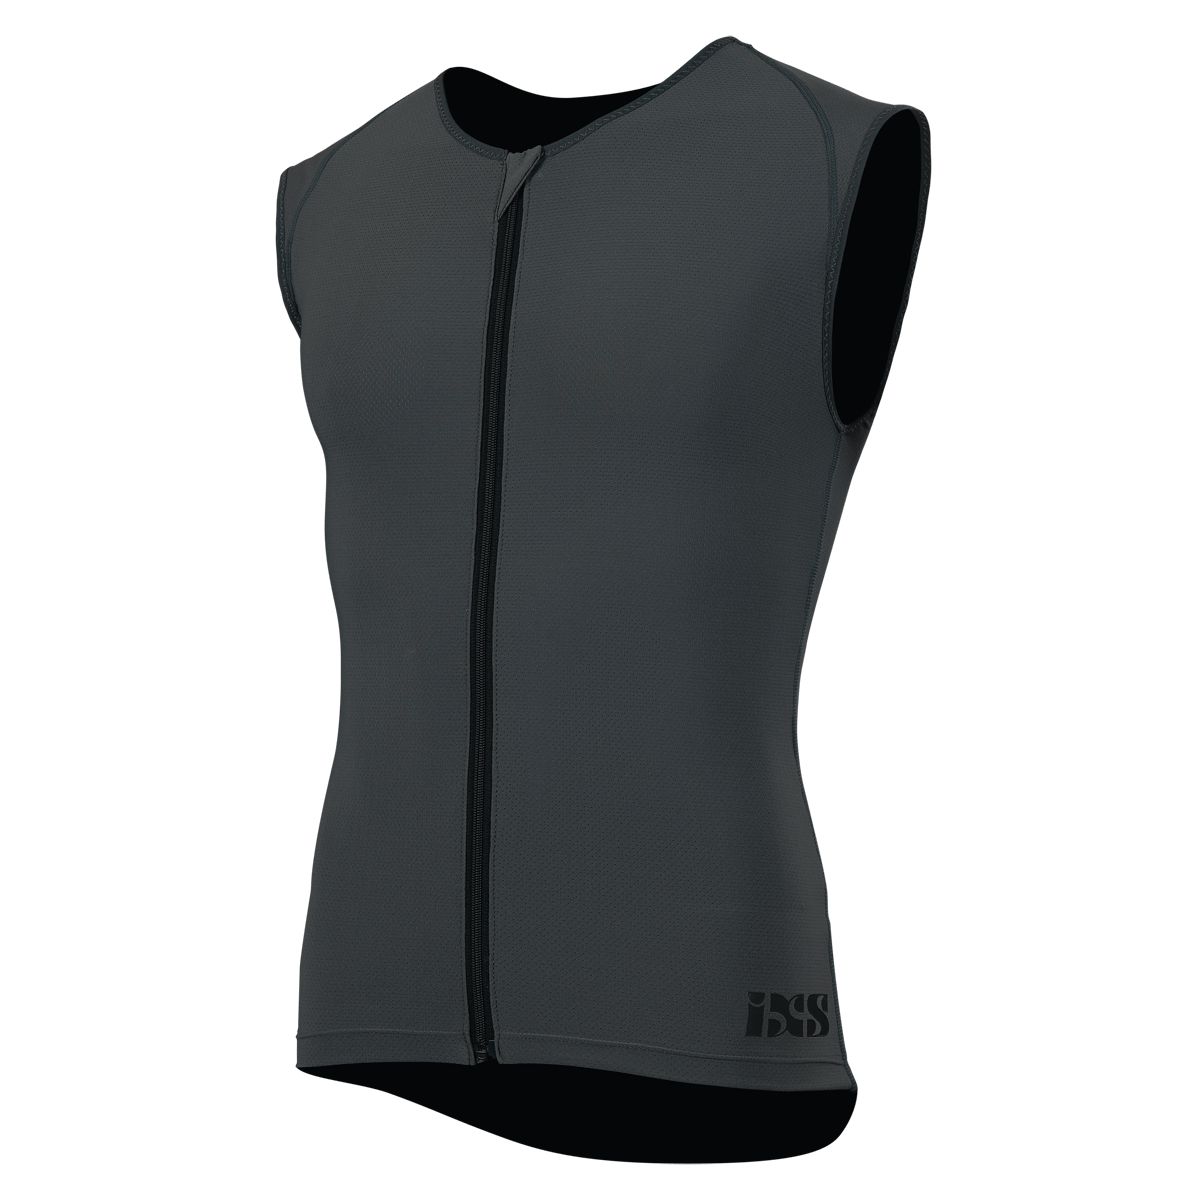 iXS Flow Upper Body Protection - Chest Protection - Bicycle Warehouse